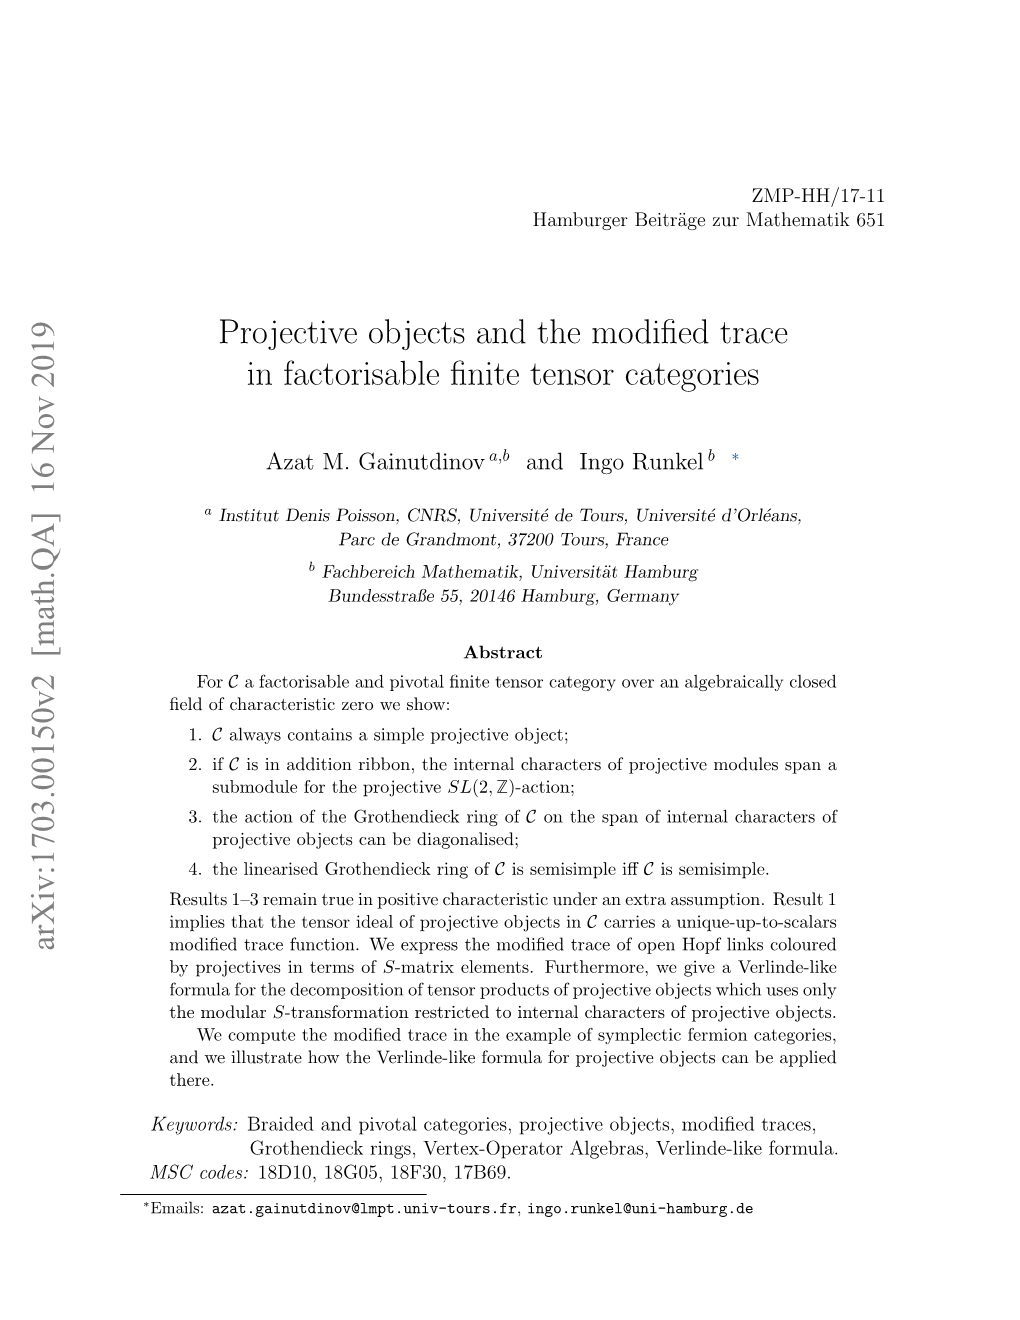 Projective Objects and the Modified Trace in Factorisable Finite Tensor